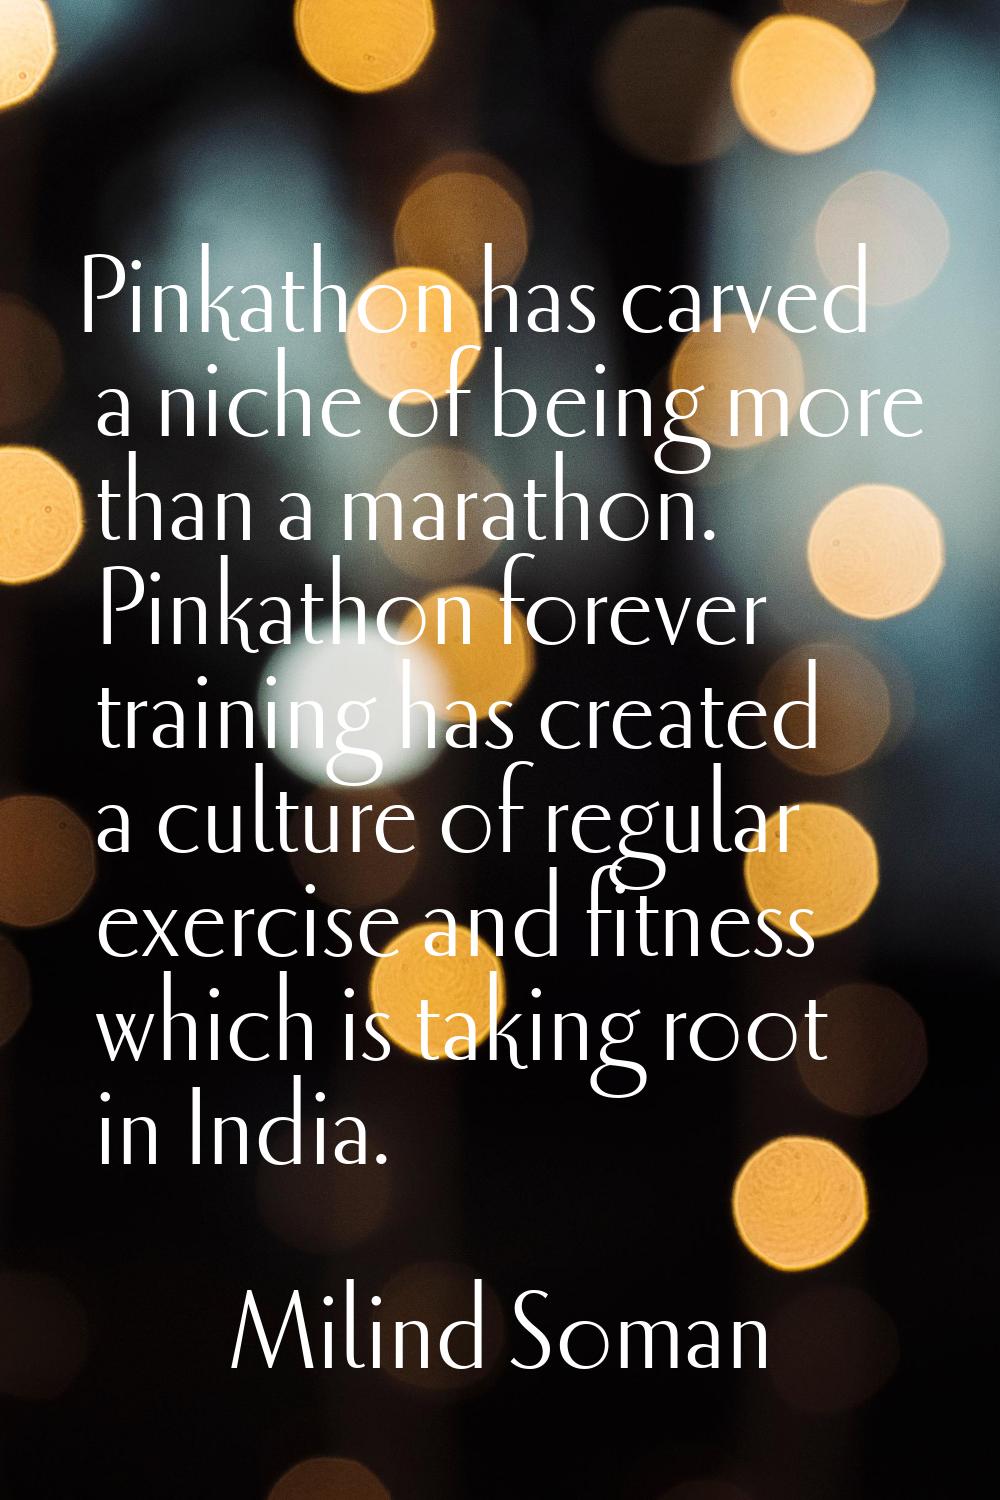 Pinkathon has carved a niche of being more than a marathon. Pinkathon forever training has created 